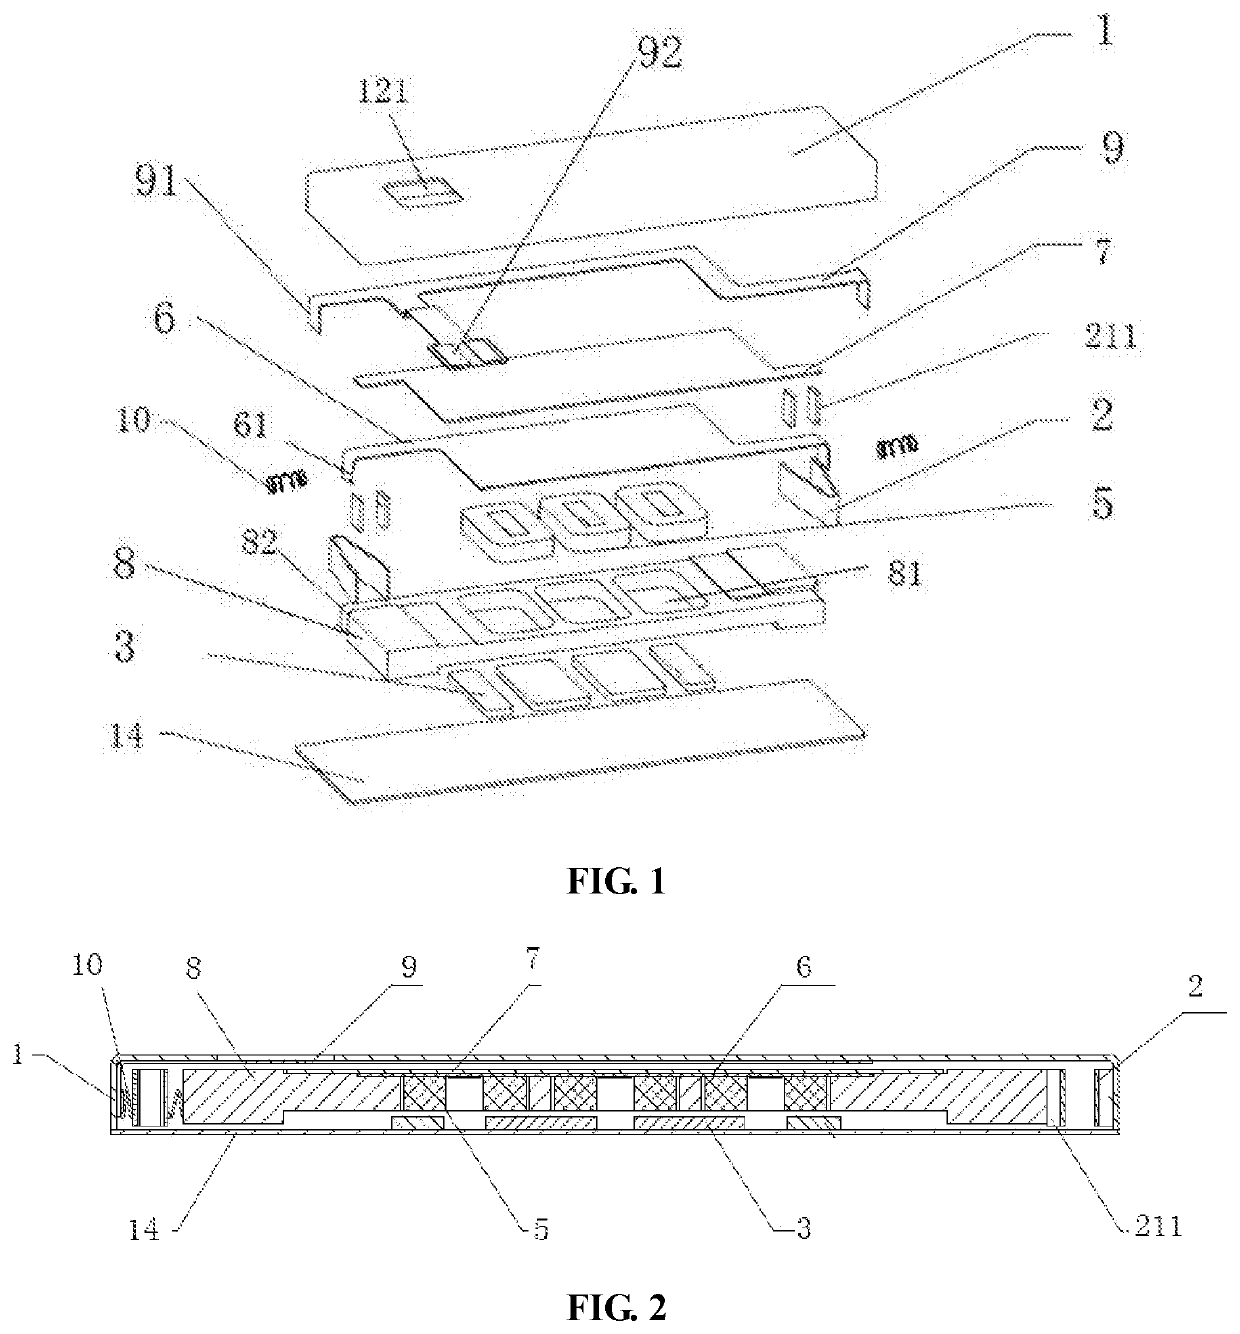 Linear motor with electric current injection assembly with springs connected to movable coil inside a mass block